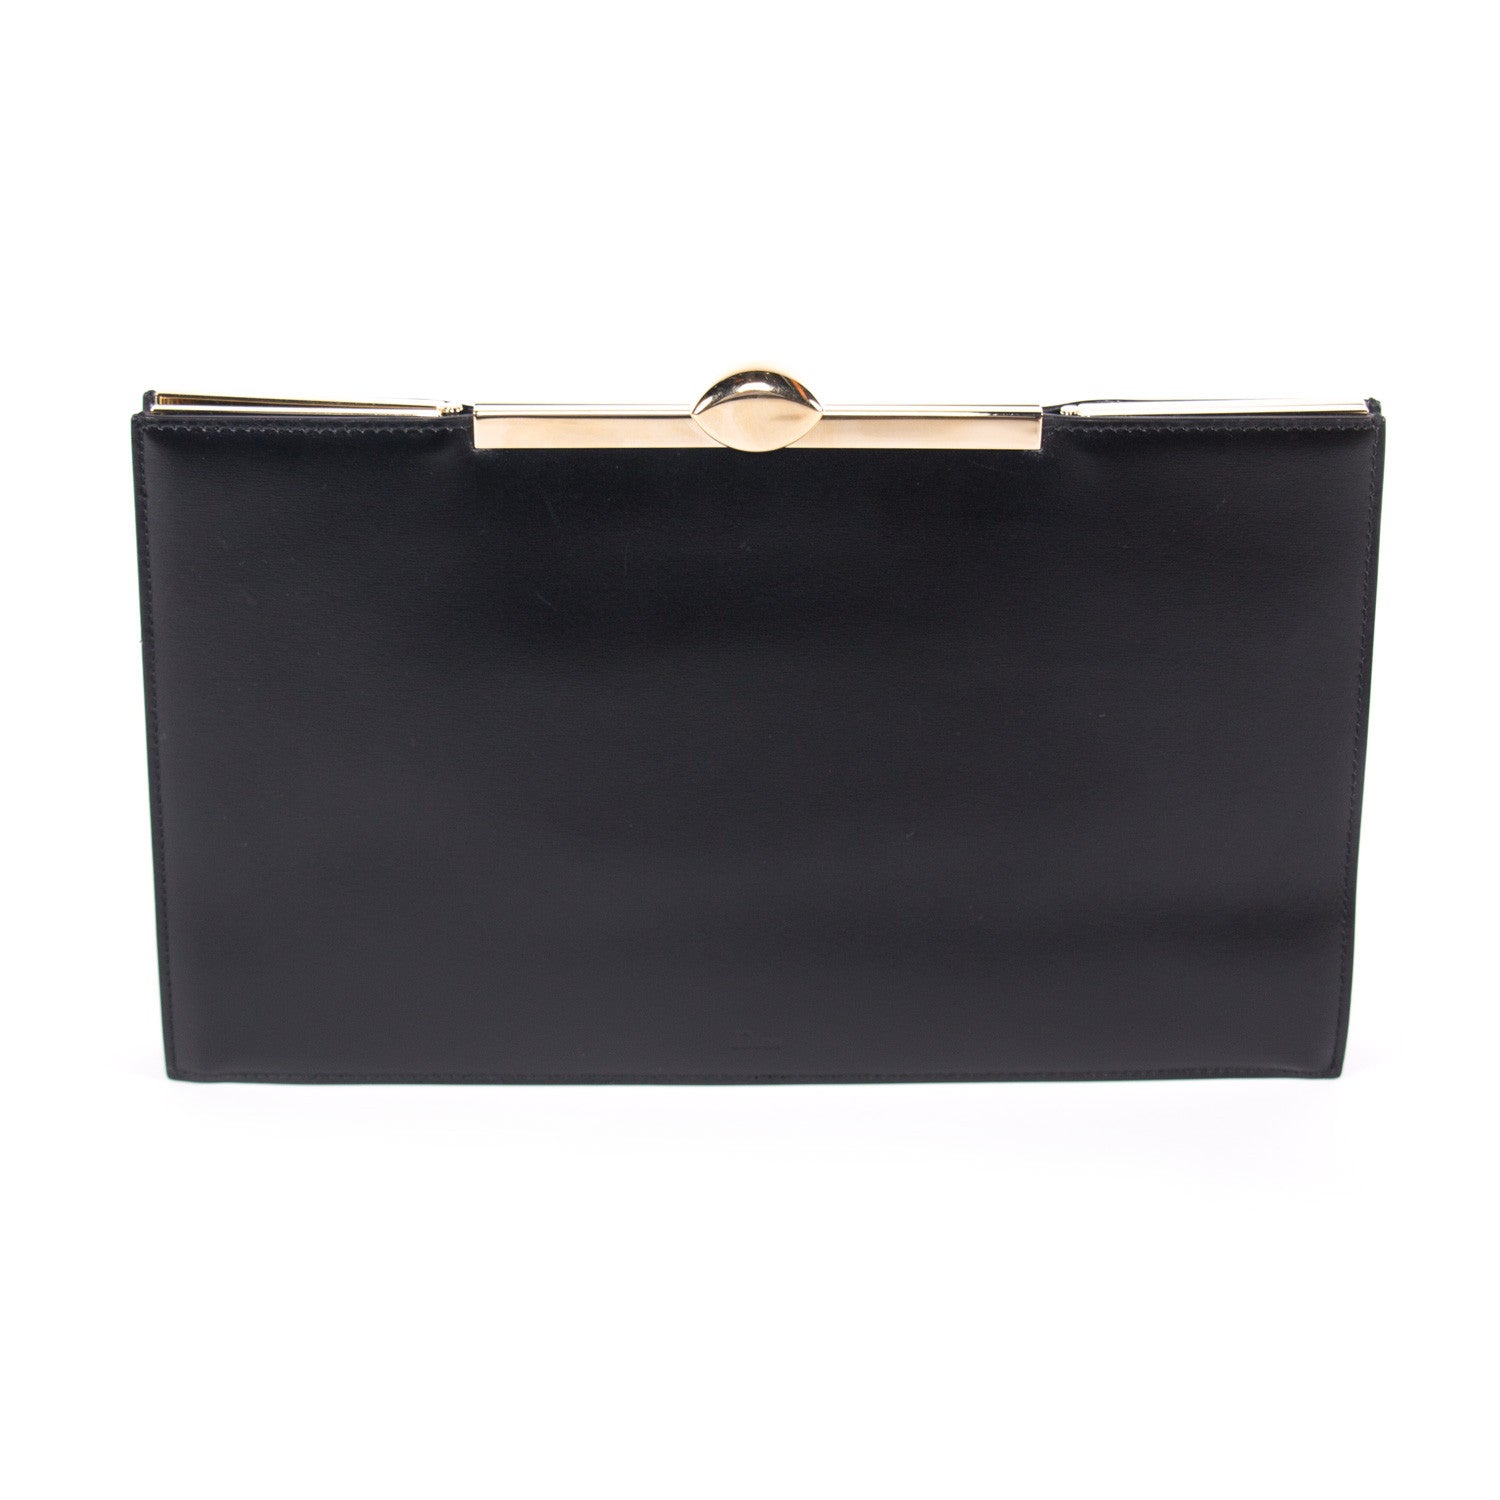 Shop authentic Christian Dior Box Clutch Bag at revogue for just USD 790.00